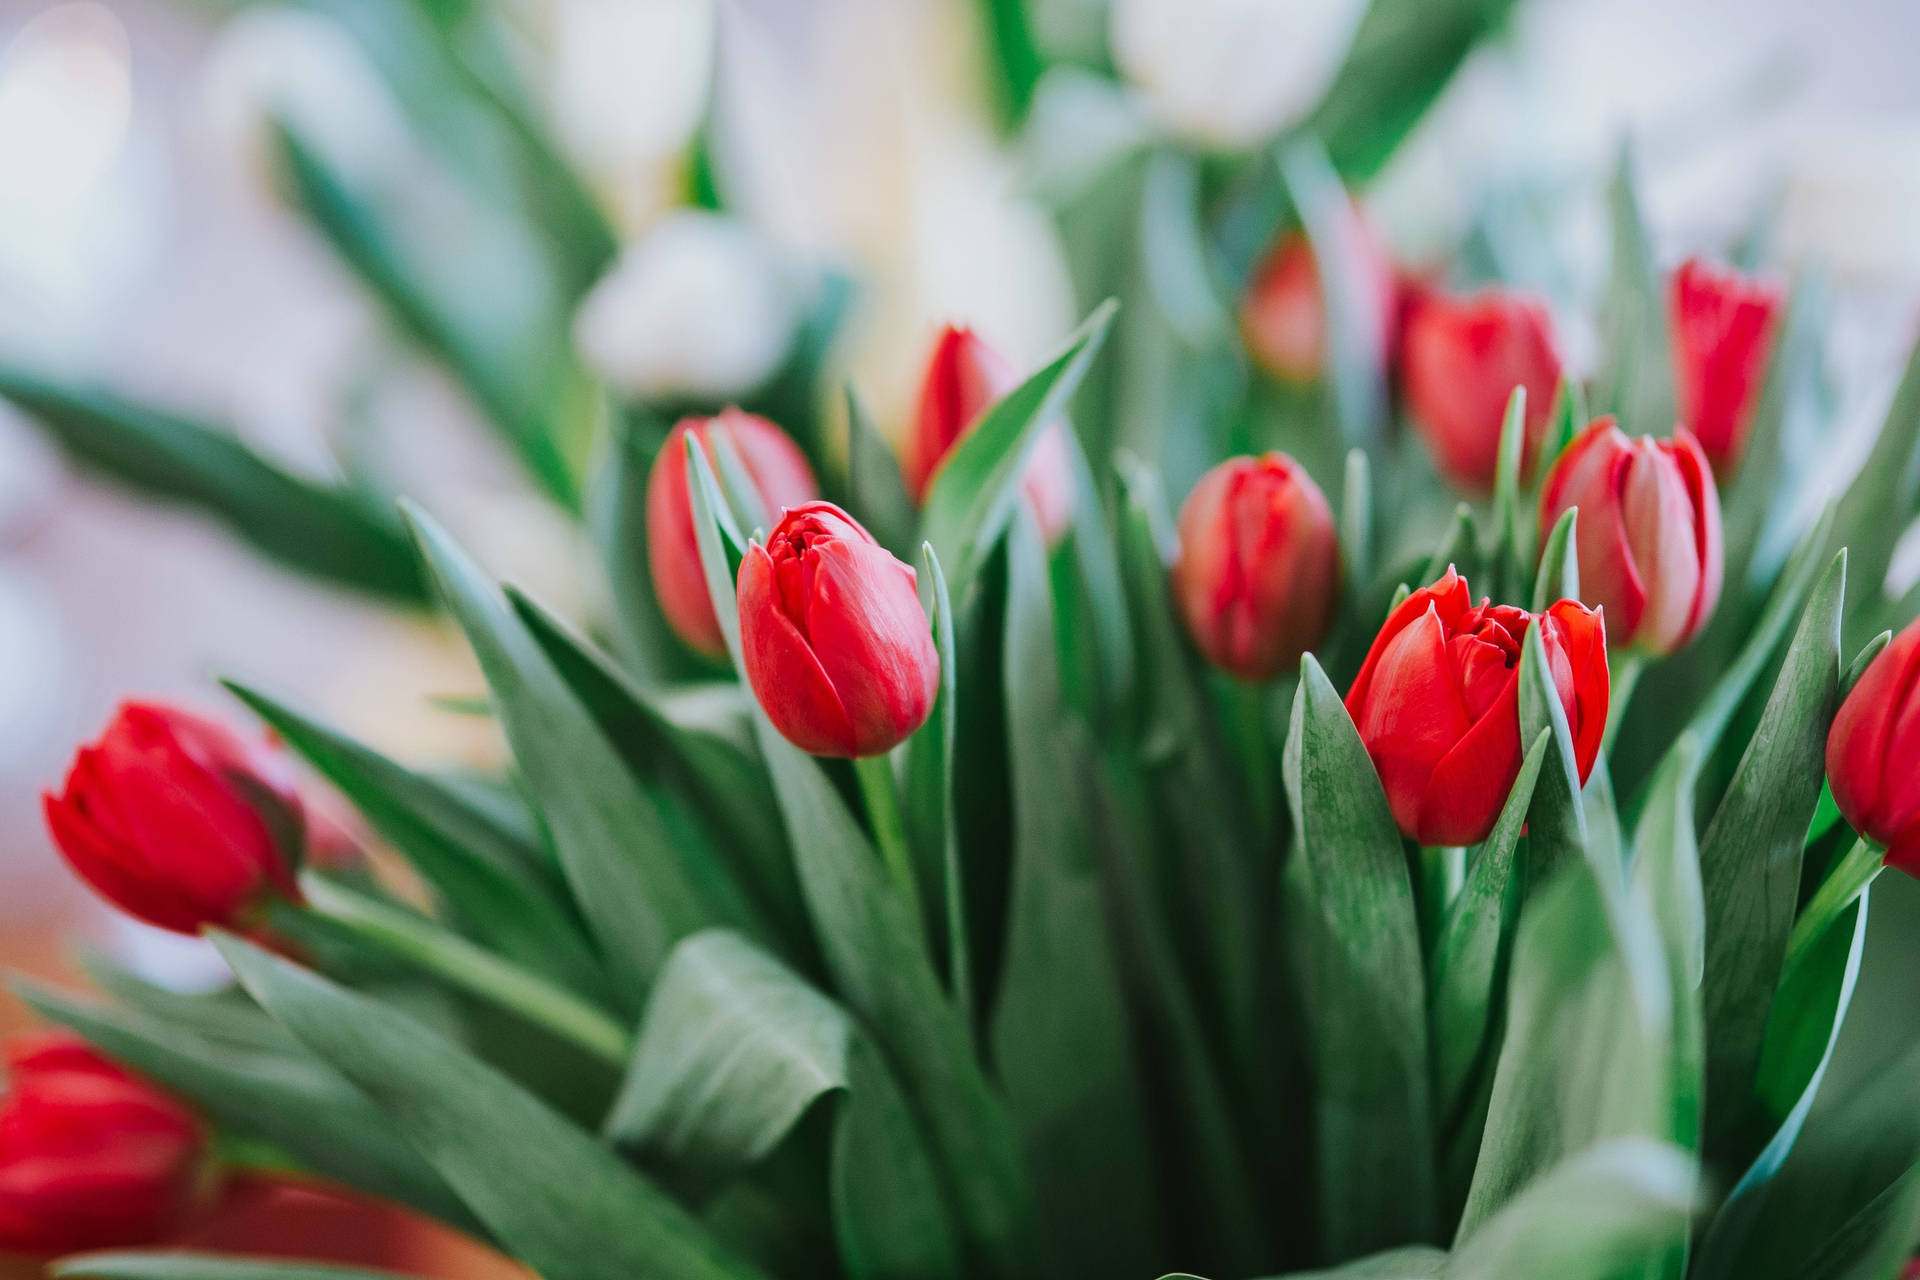 Green Leaves And Red Tulips